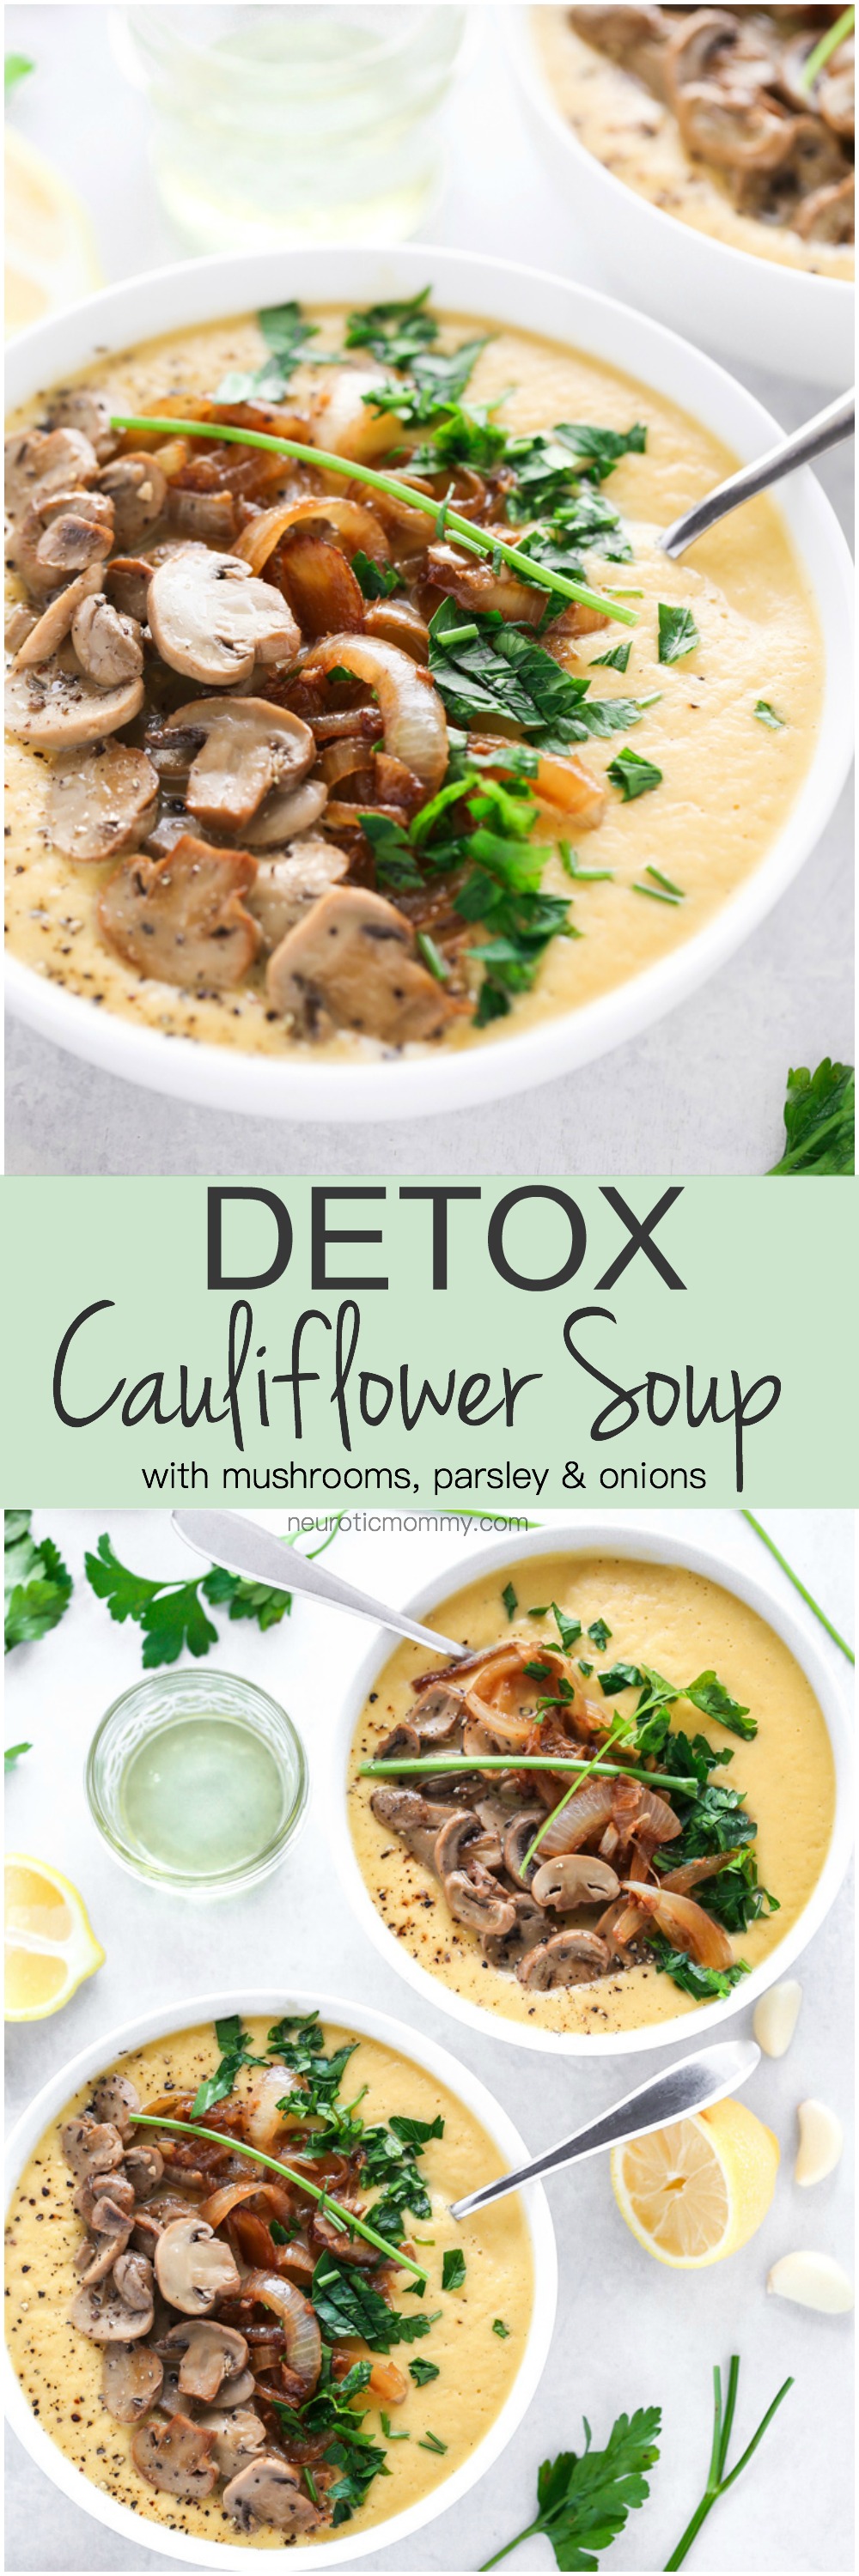 Detox Cauliflower Soup - Make a pot of this if you want to keep sickness at bay or shed a few pounds. It's low carb, packed with delicious veggies, herbs and spices and perfect for those chilly winter mornings. NeuroticMommy.com #vegan #detox #soup #health